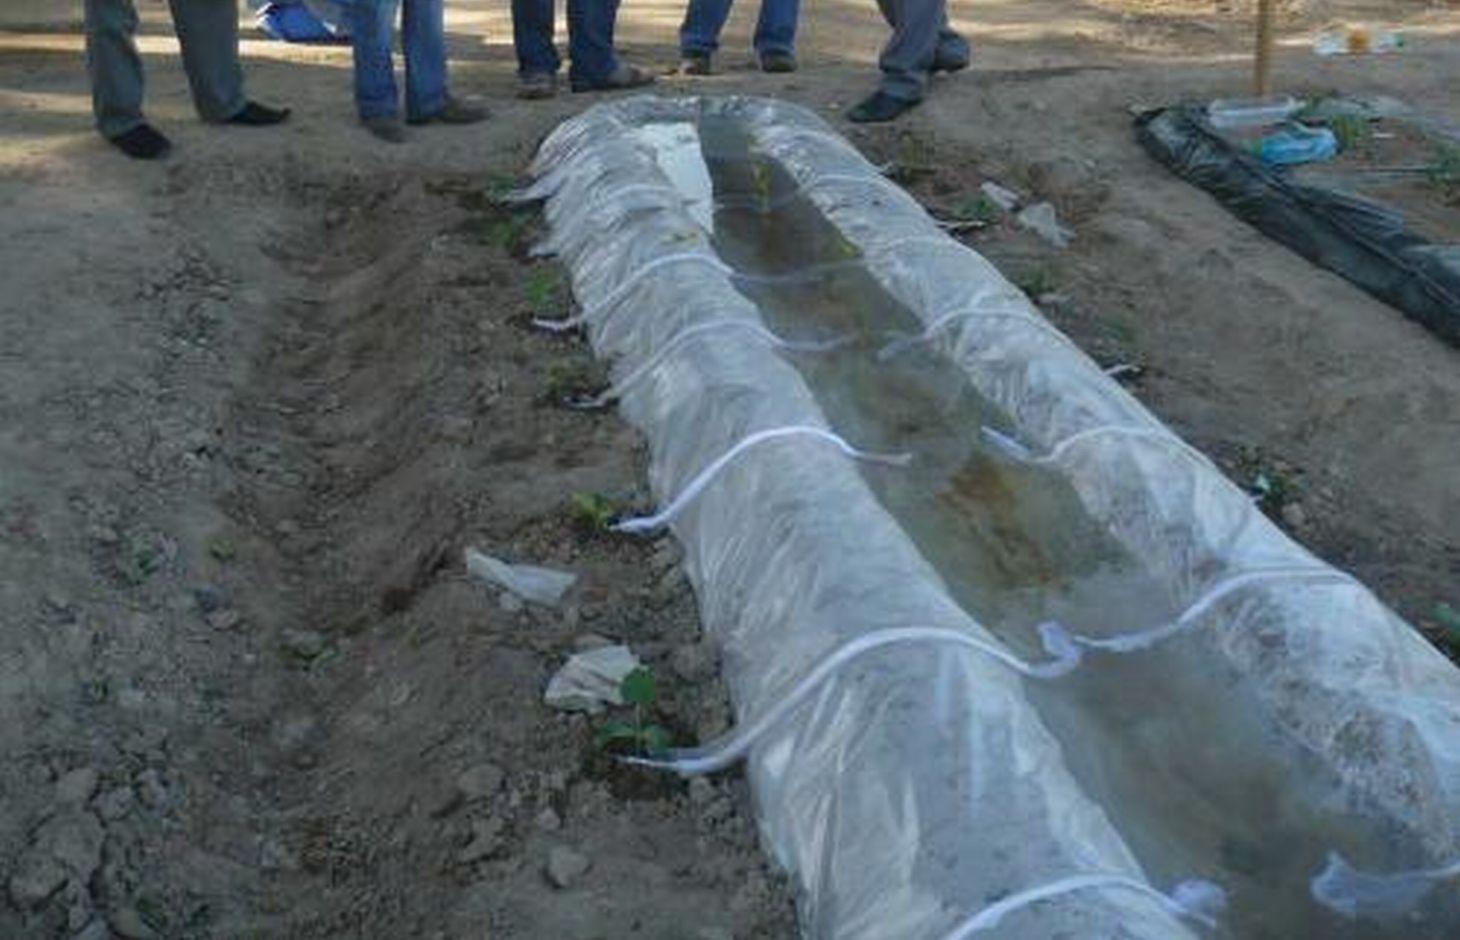 The polyethylene film covers vegetable patches and is filled with water. Every plant is watered with the use of rag strings.